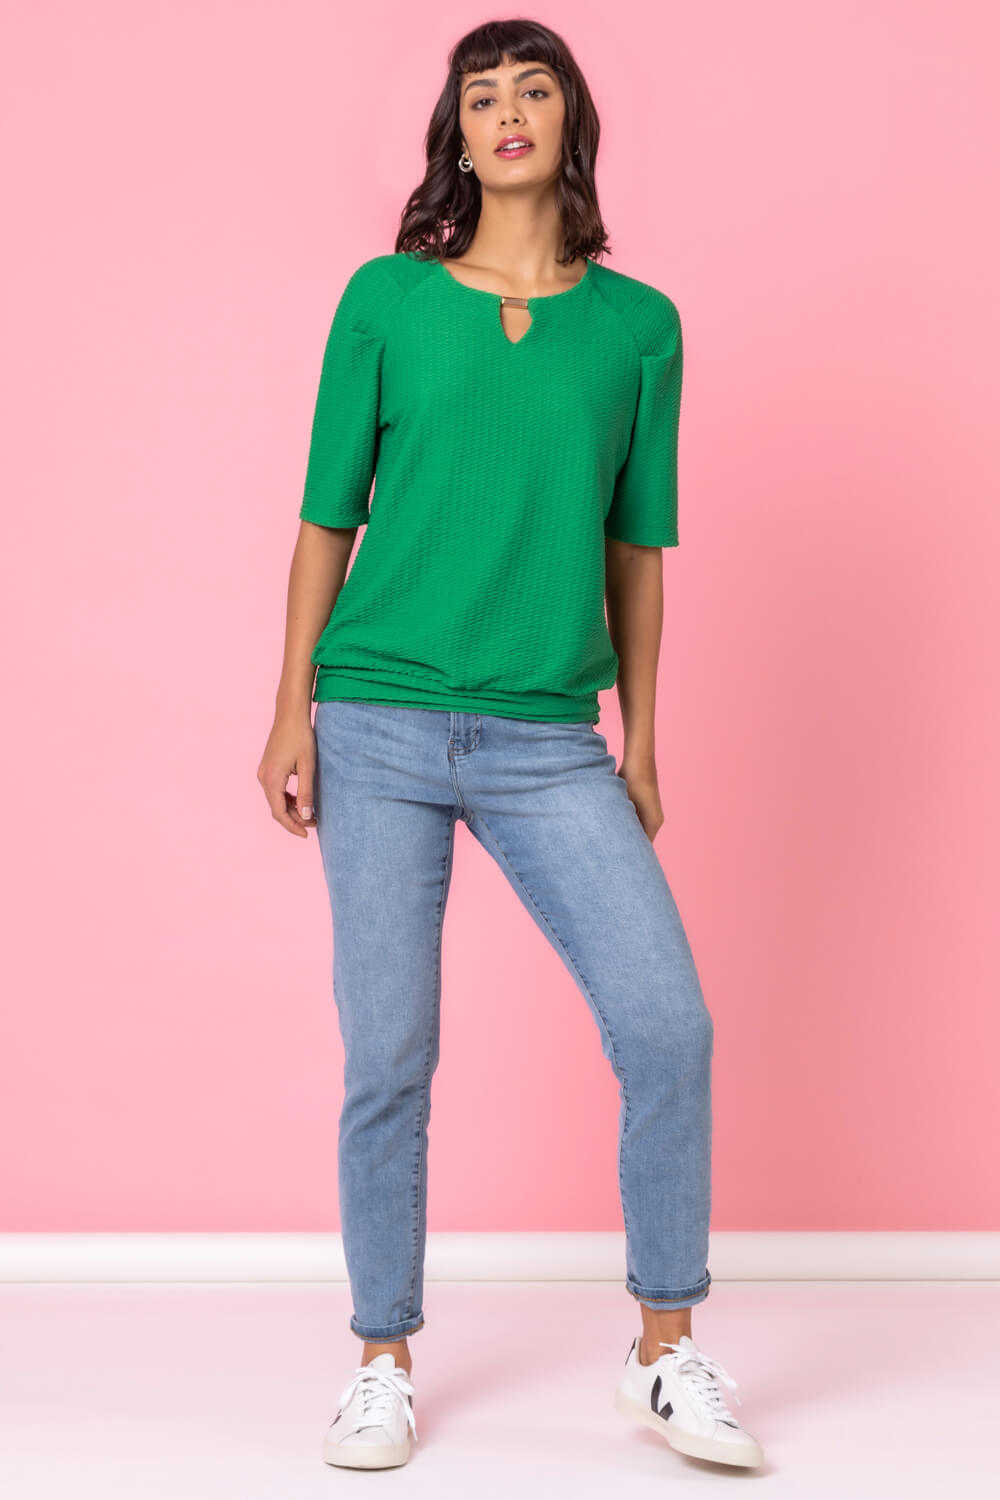 Green Keyhole Neck Textured Top, Image 3 of 4